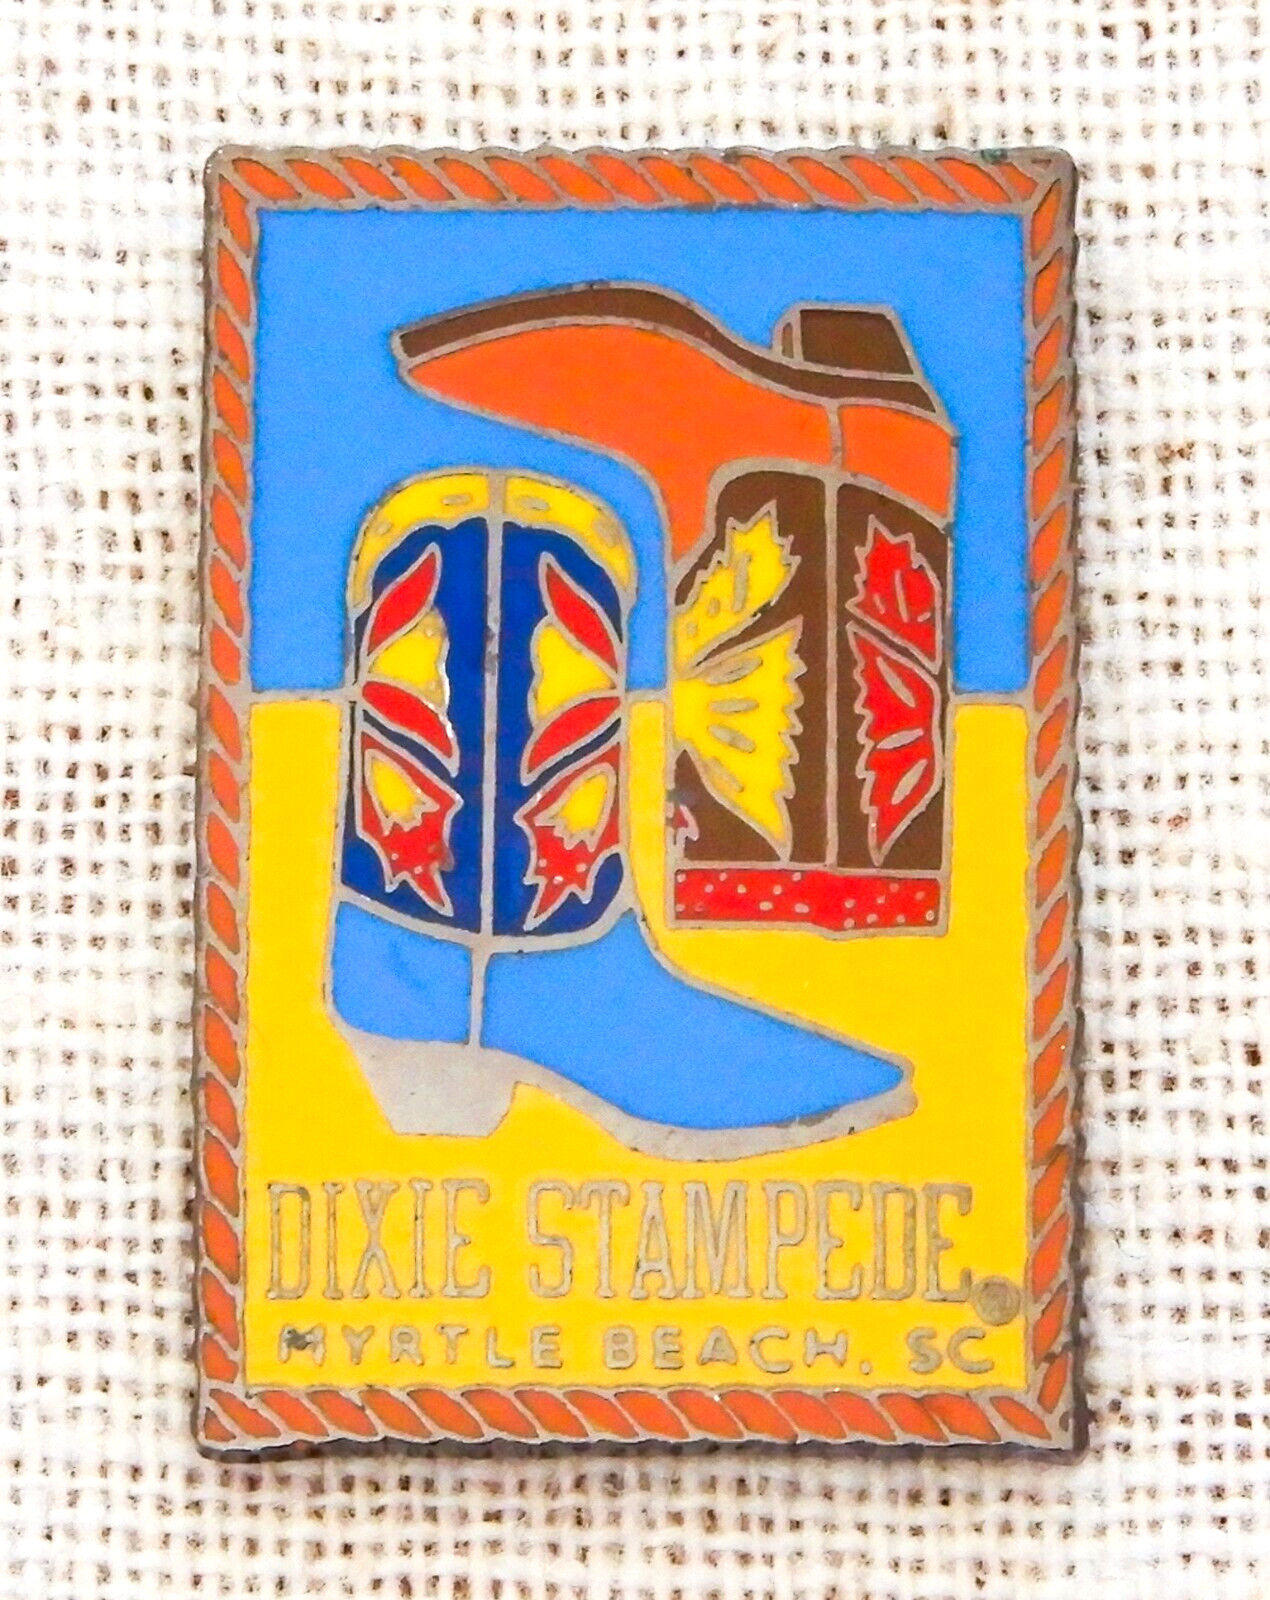 Dixie Stampede Lapel Pin Myrtle Beach SC Dolly Parton Vintage Boot Western